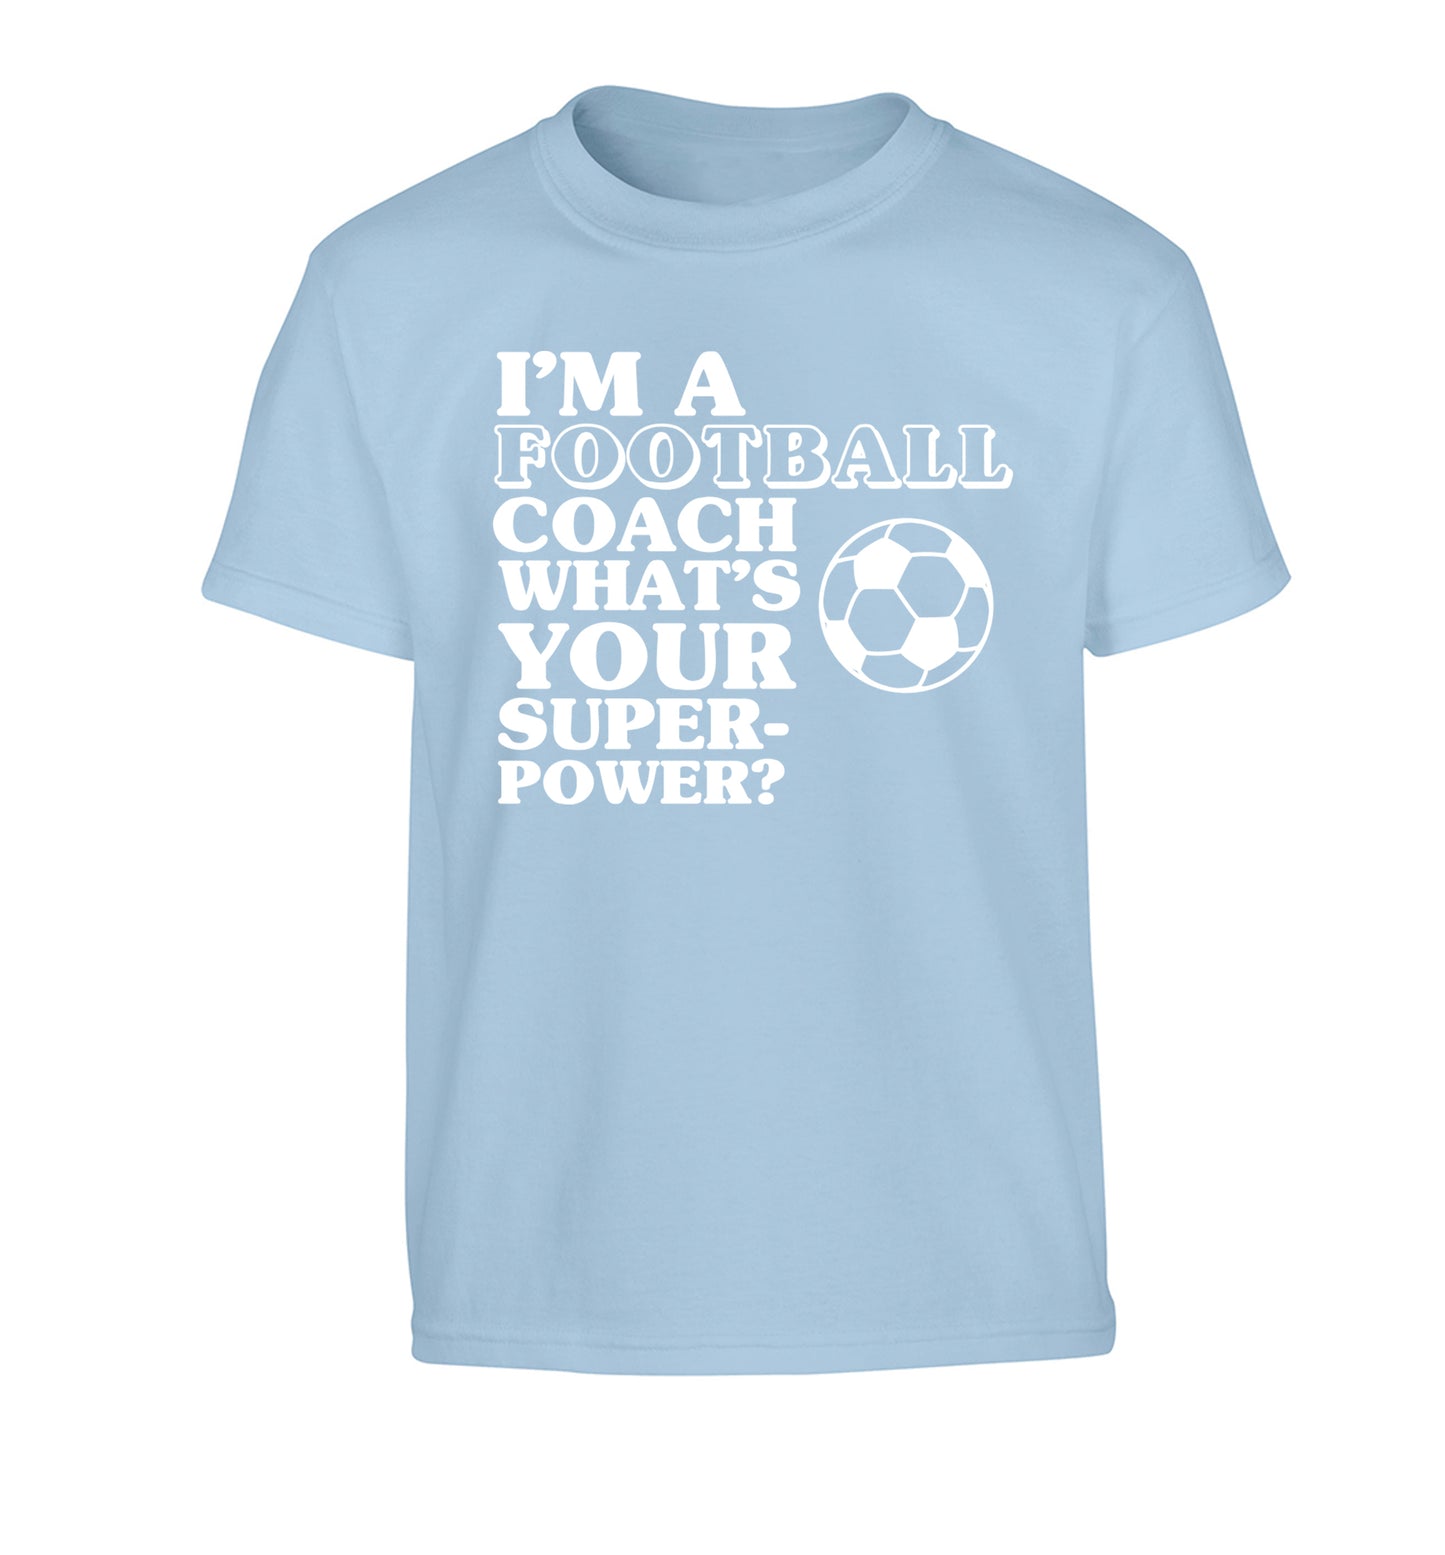 I'm a football coach what's your superpower? Children's light blue Tshirt 12-14 Years